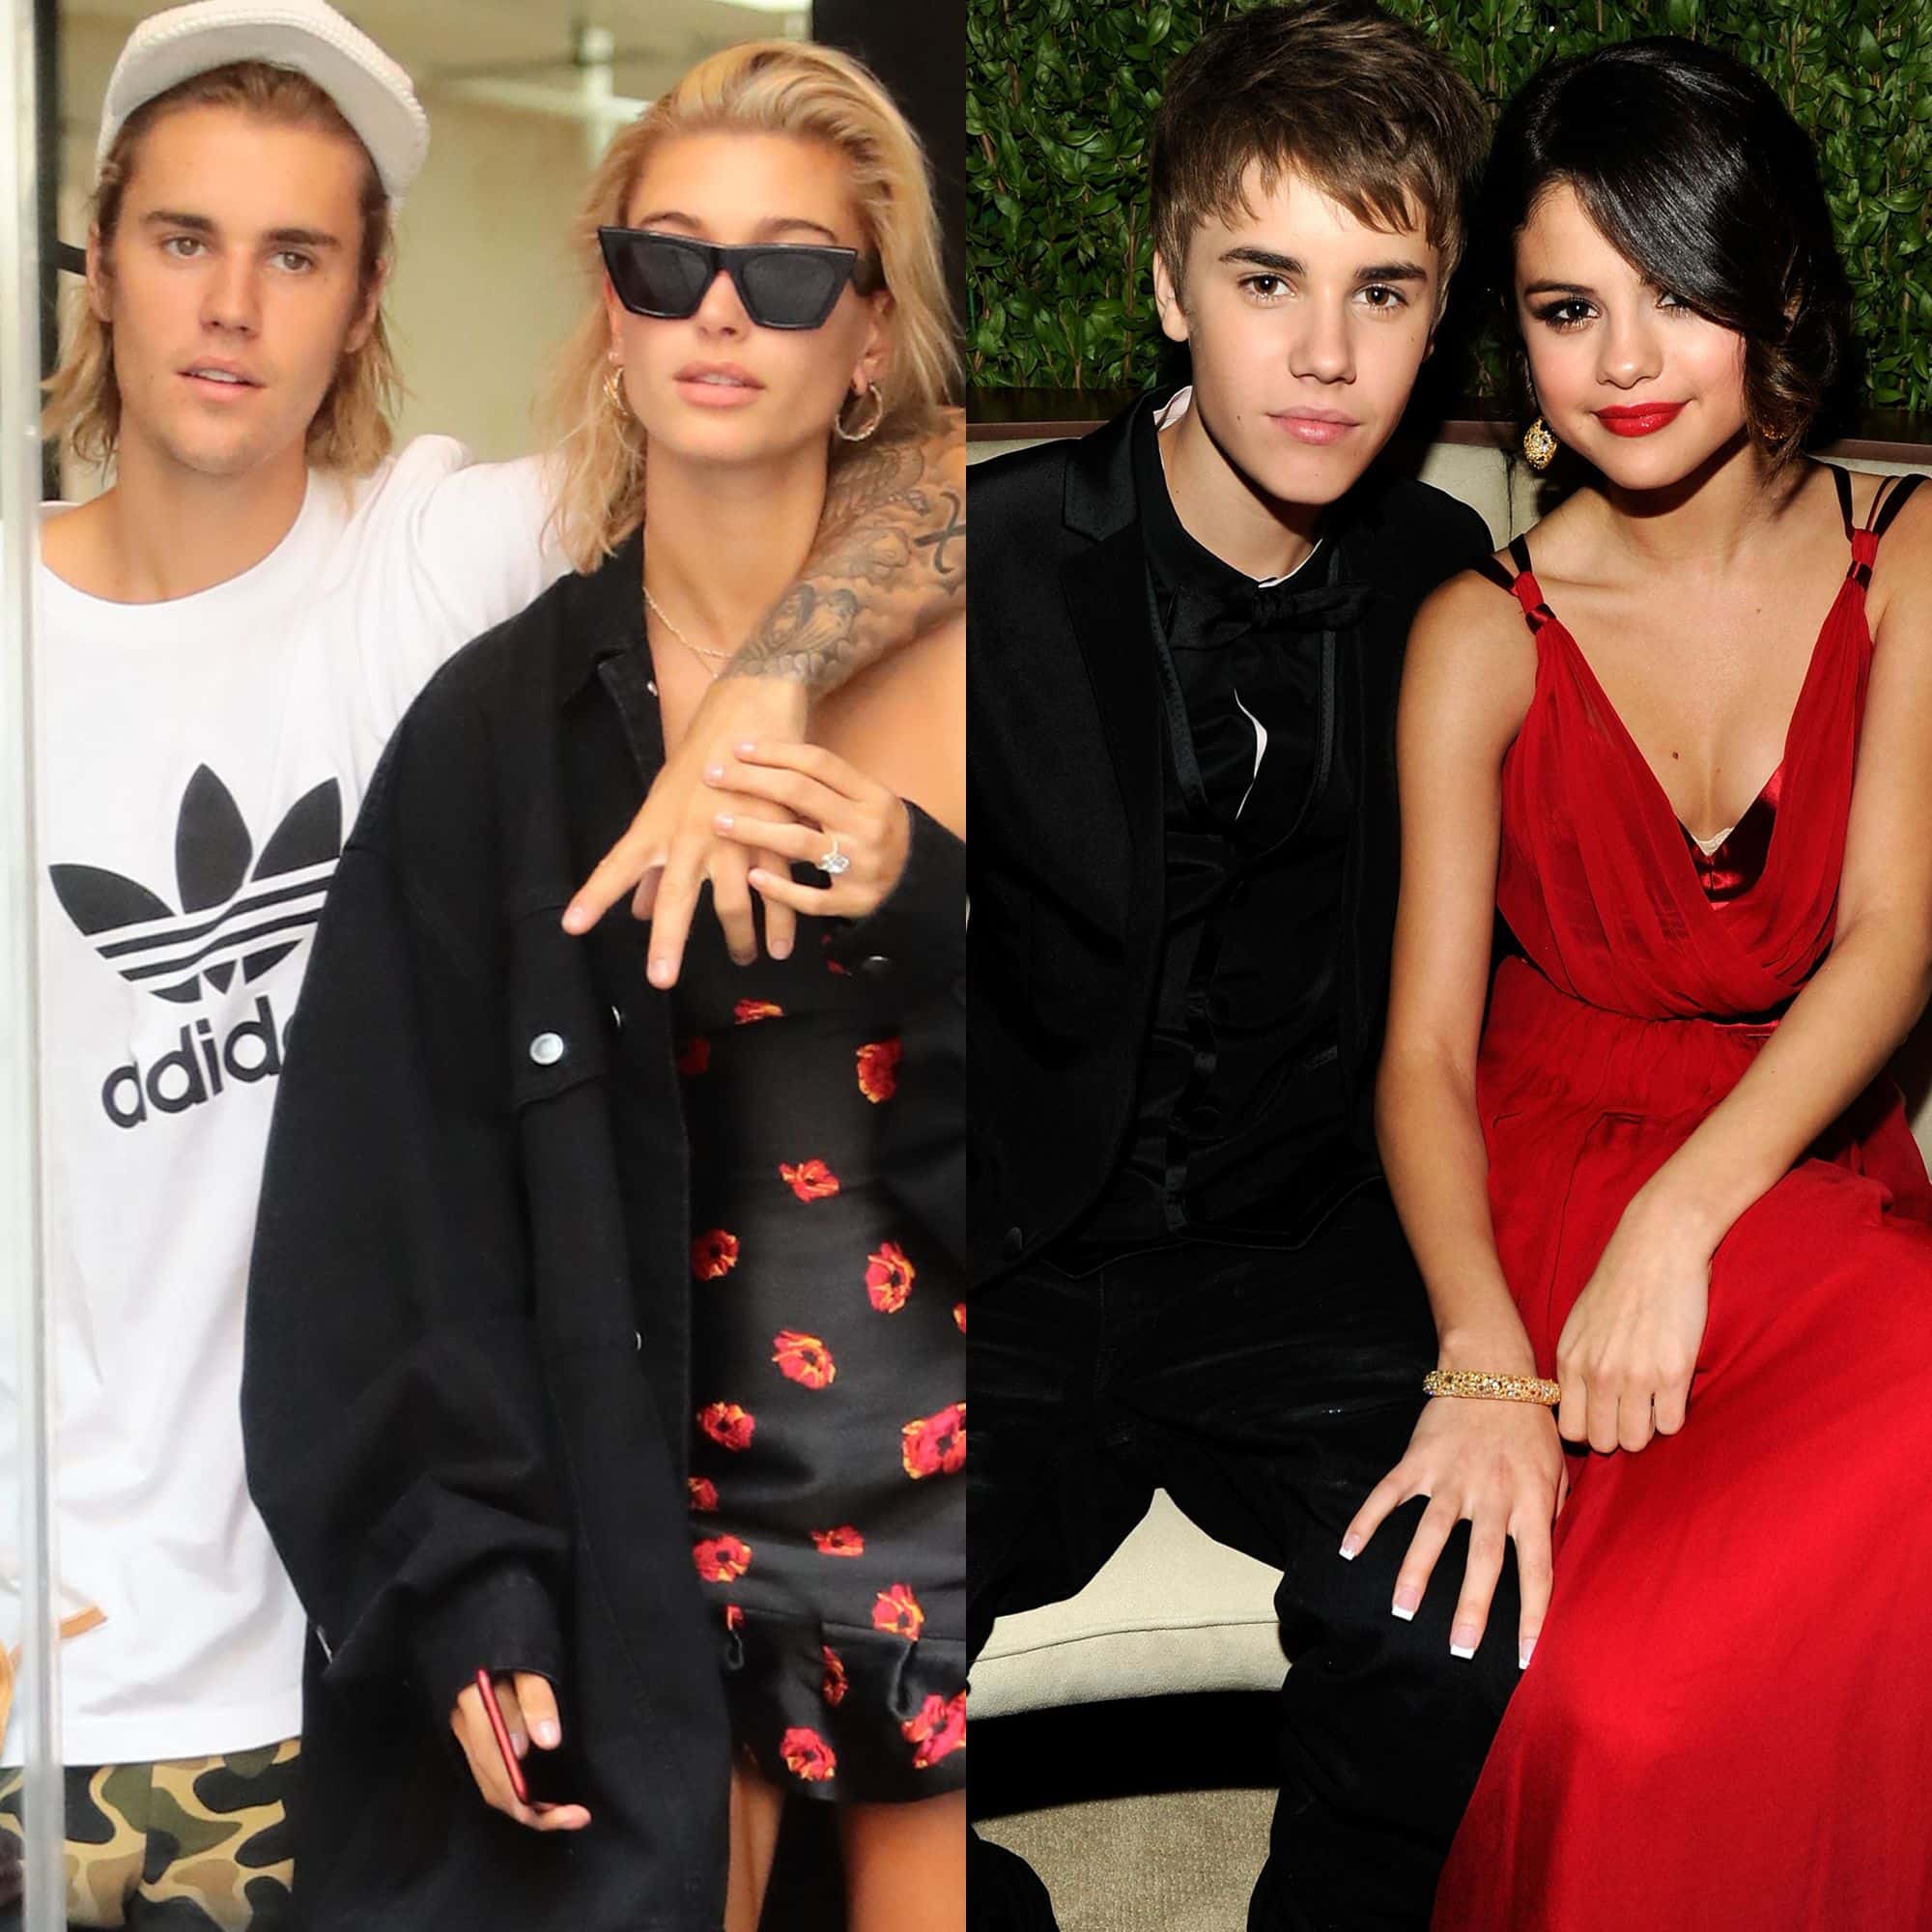 Hailey Bieber addresses rumours about her relationship with Justin Bieber after four years of marriage, and she claims it has nothing to do with Selena Gomez.